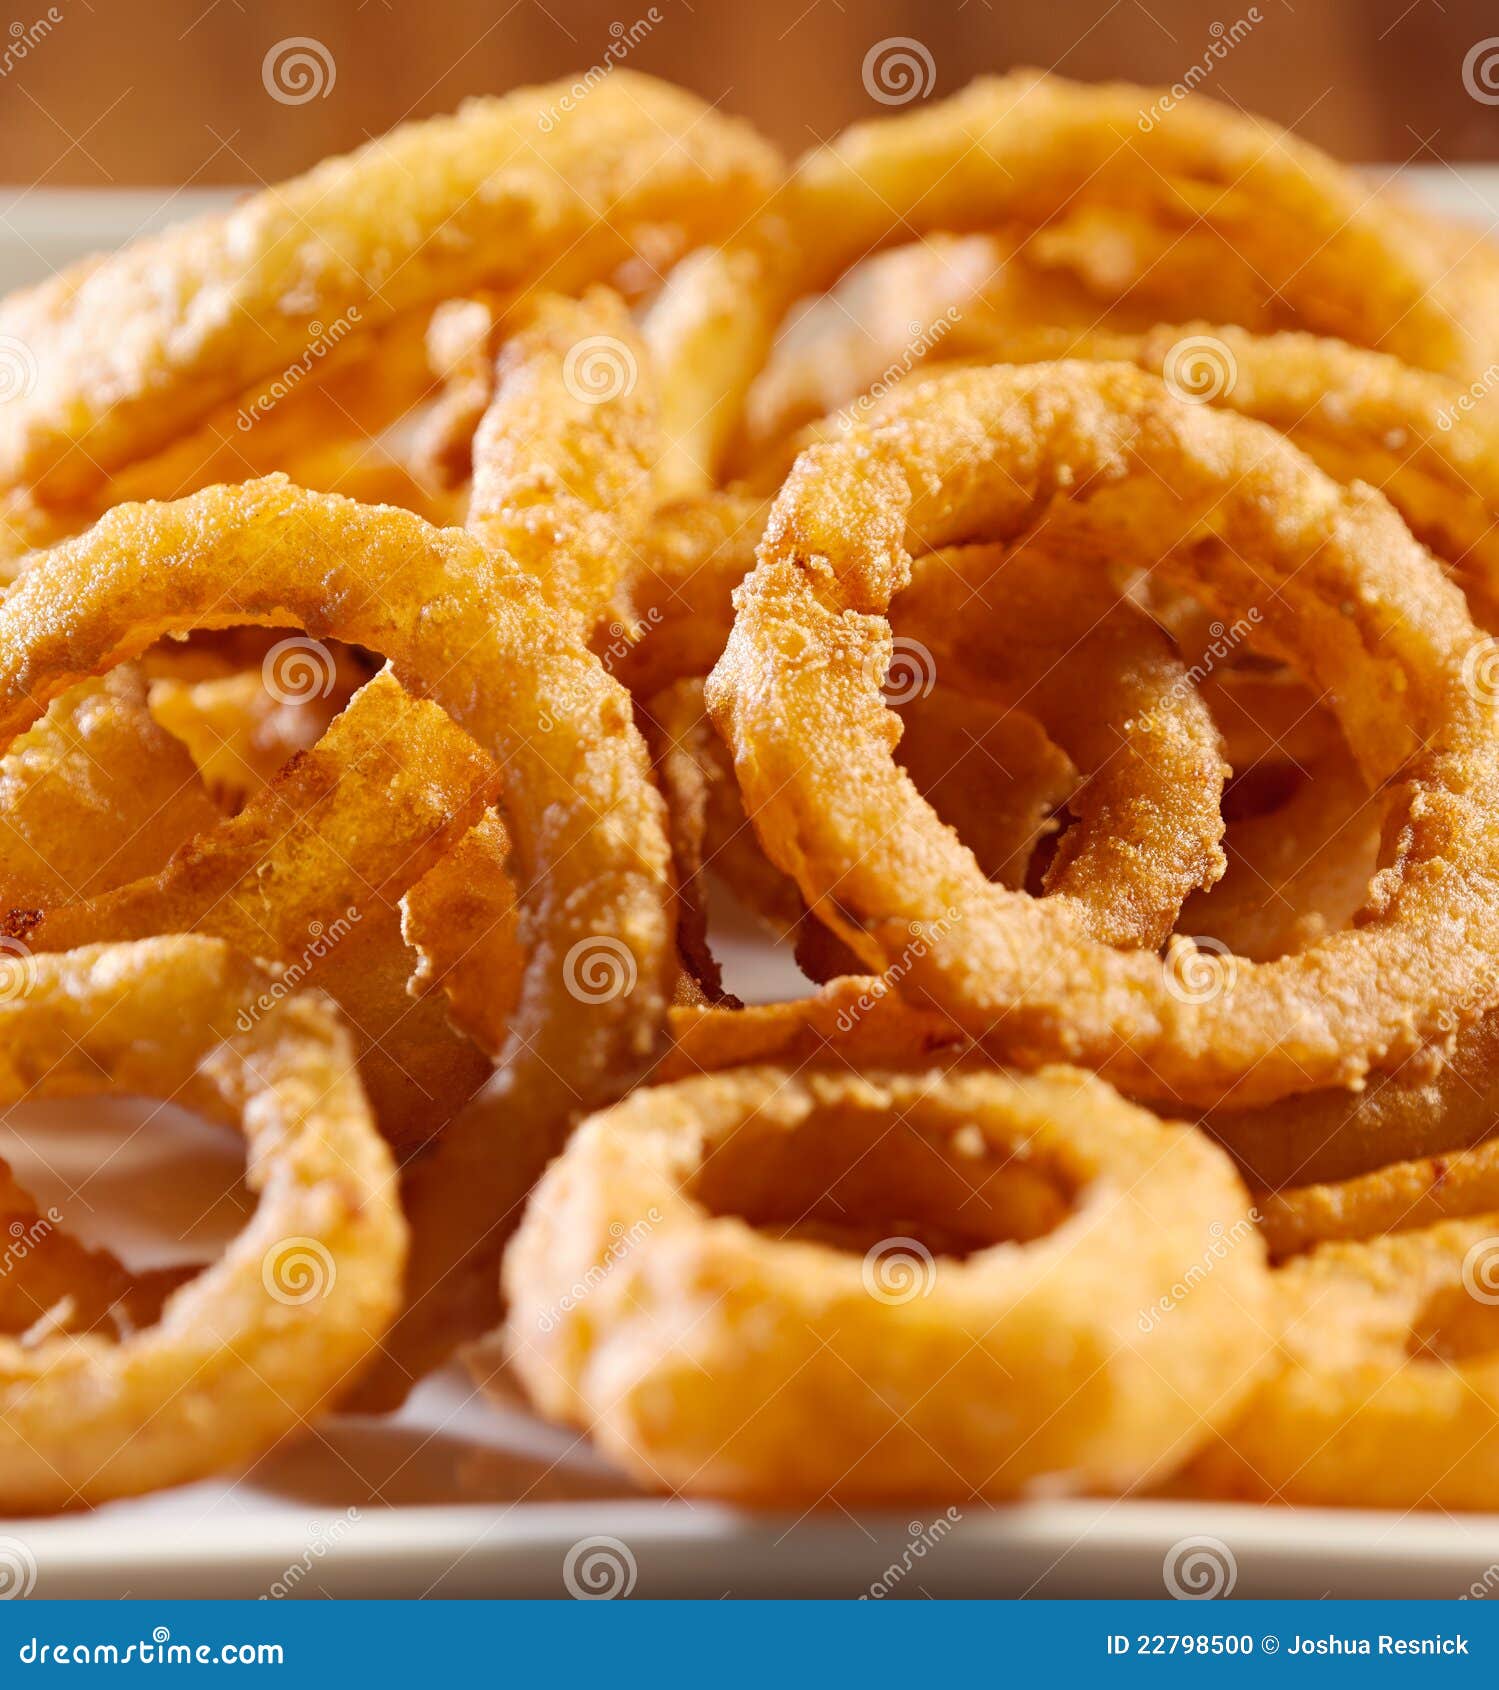 closeup photo of a pile of onion rings